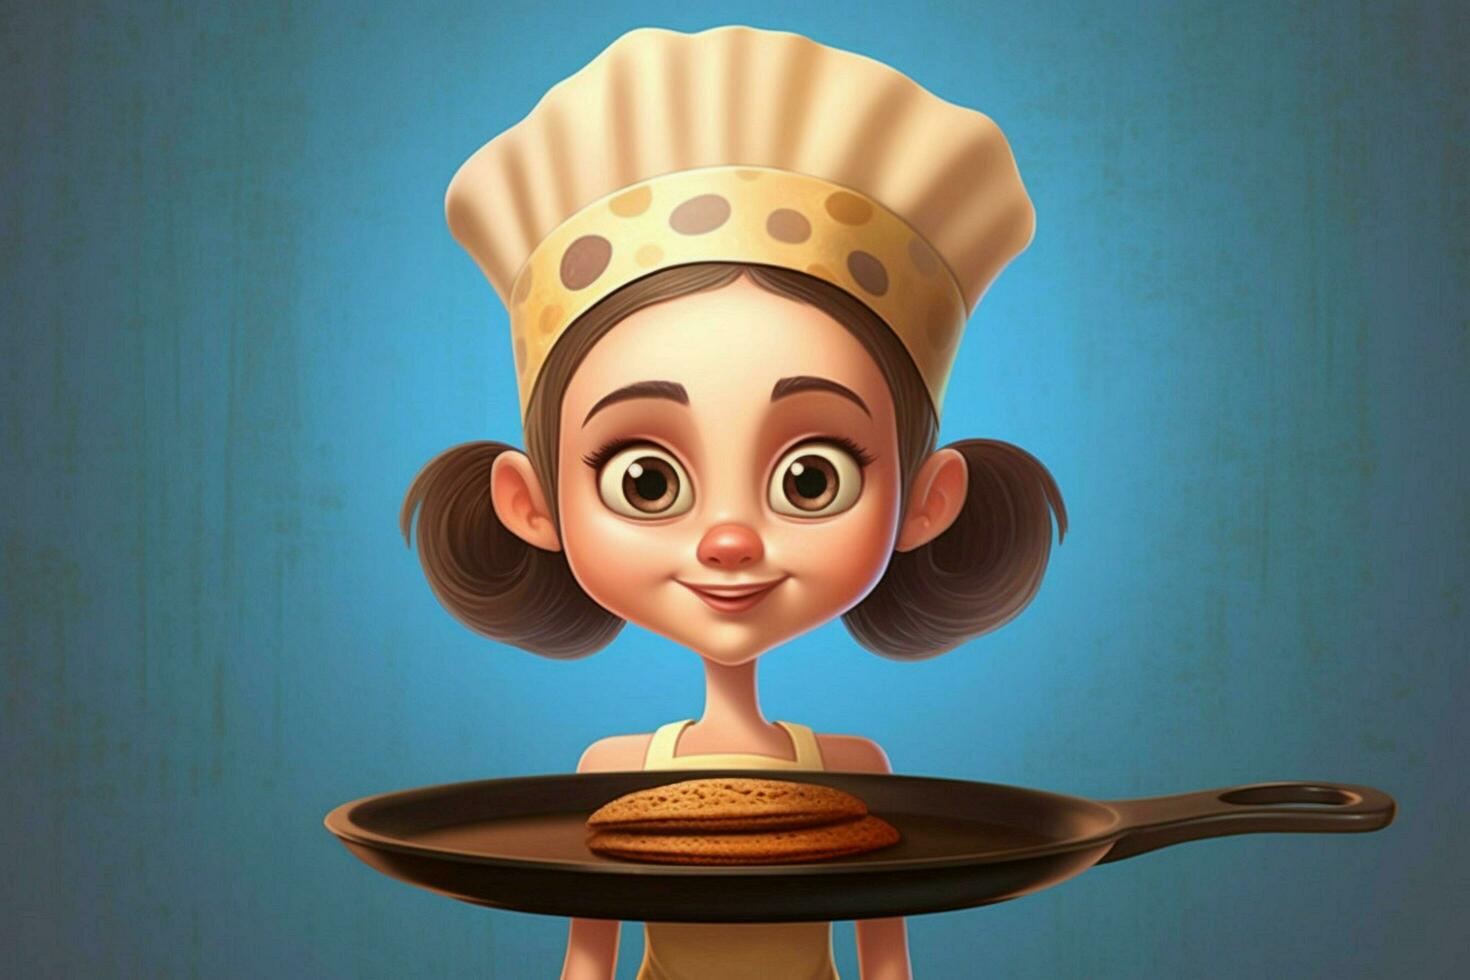 a cartoon character with a pan and pancake on her photo